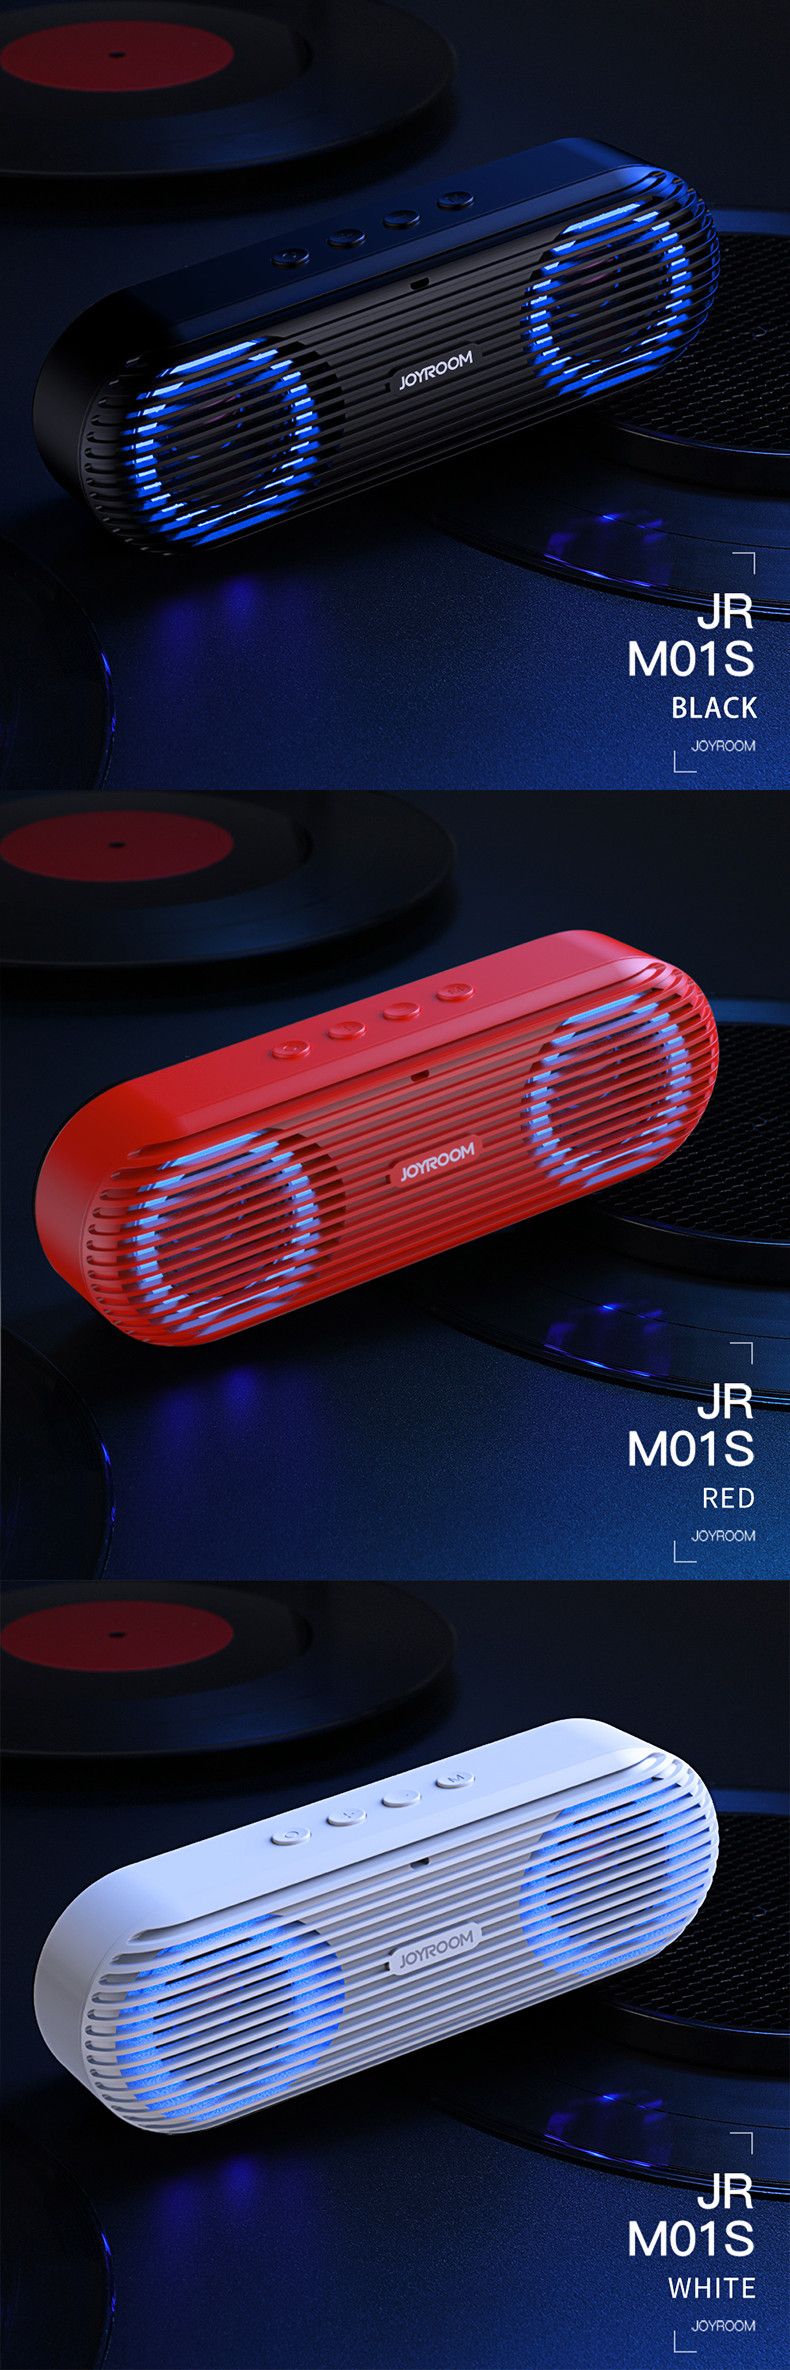 Joyroom-JR-M01S-Portable-2-In-1-Wireless-Blutooth-Lamp-Speaker-Stereo-Sound-With-Revoable-Battery-1395416